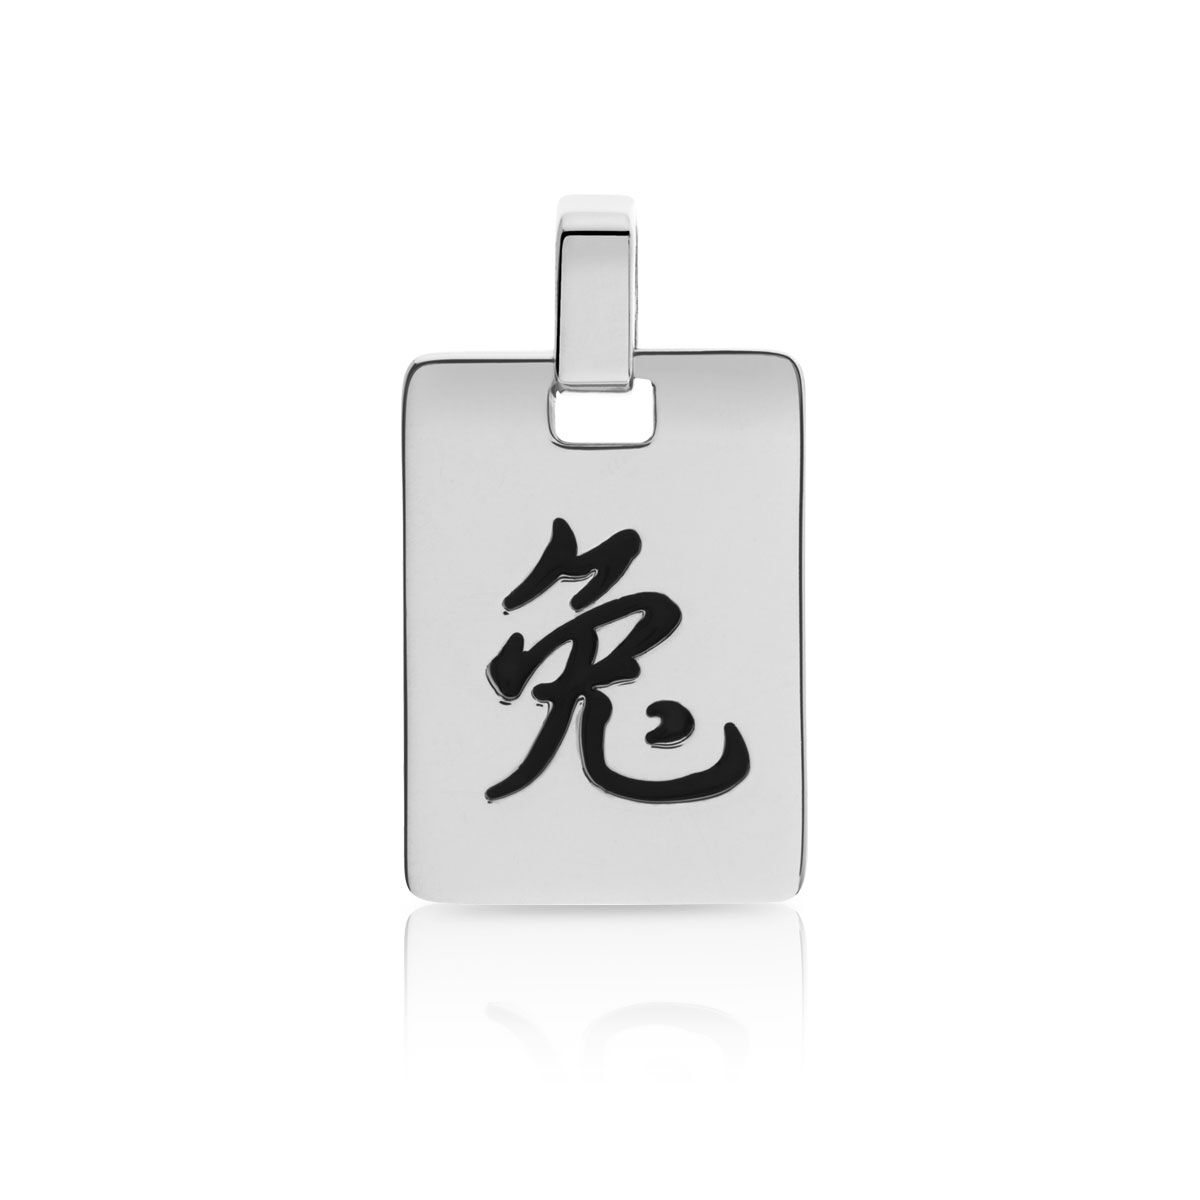 MATY OUTLET -Pendentif zodiaque chinois lapin argent 925